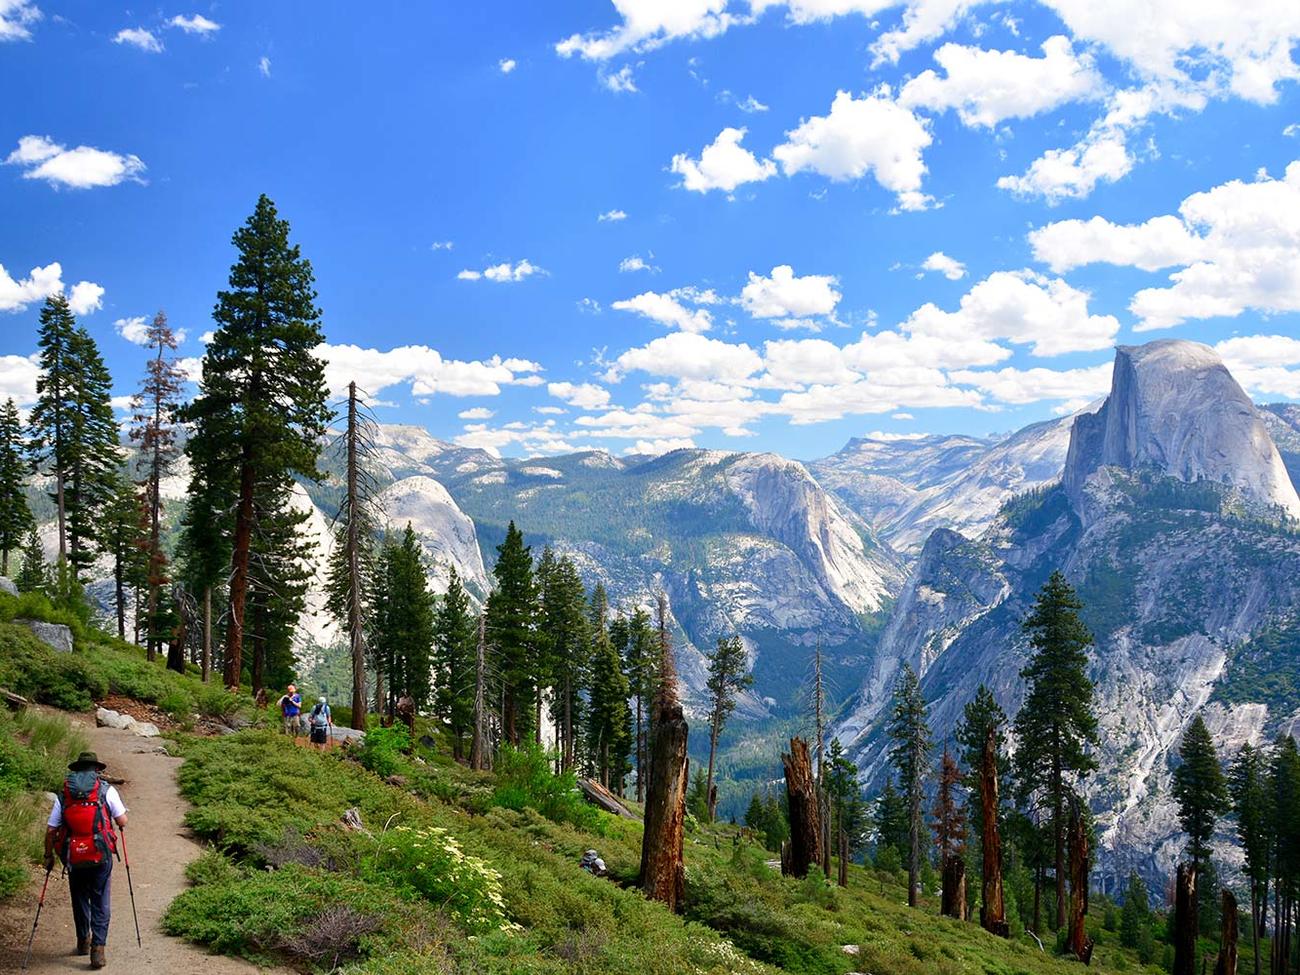 Get Free Admission to U.S. National Parks This Month